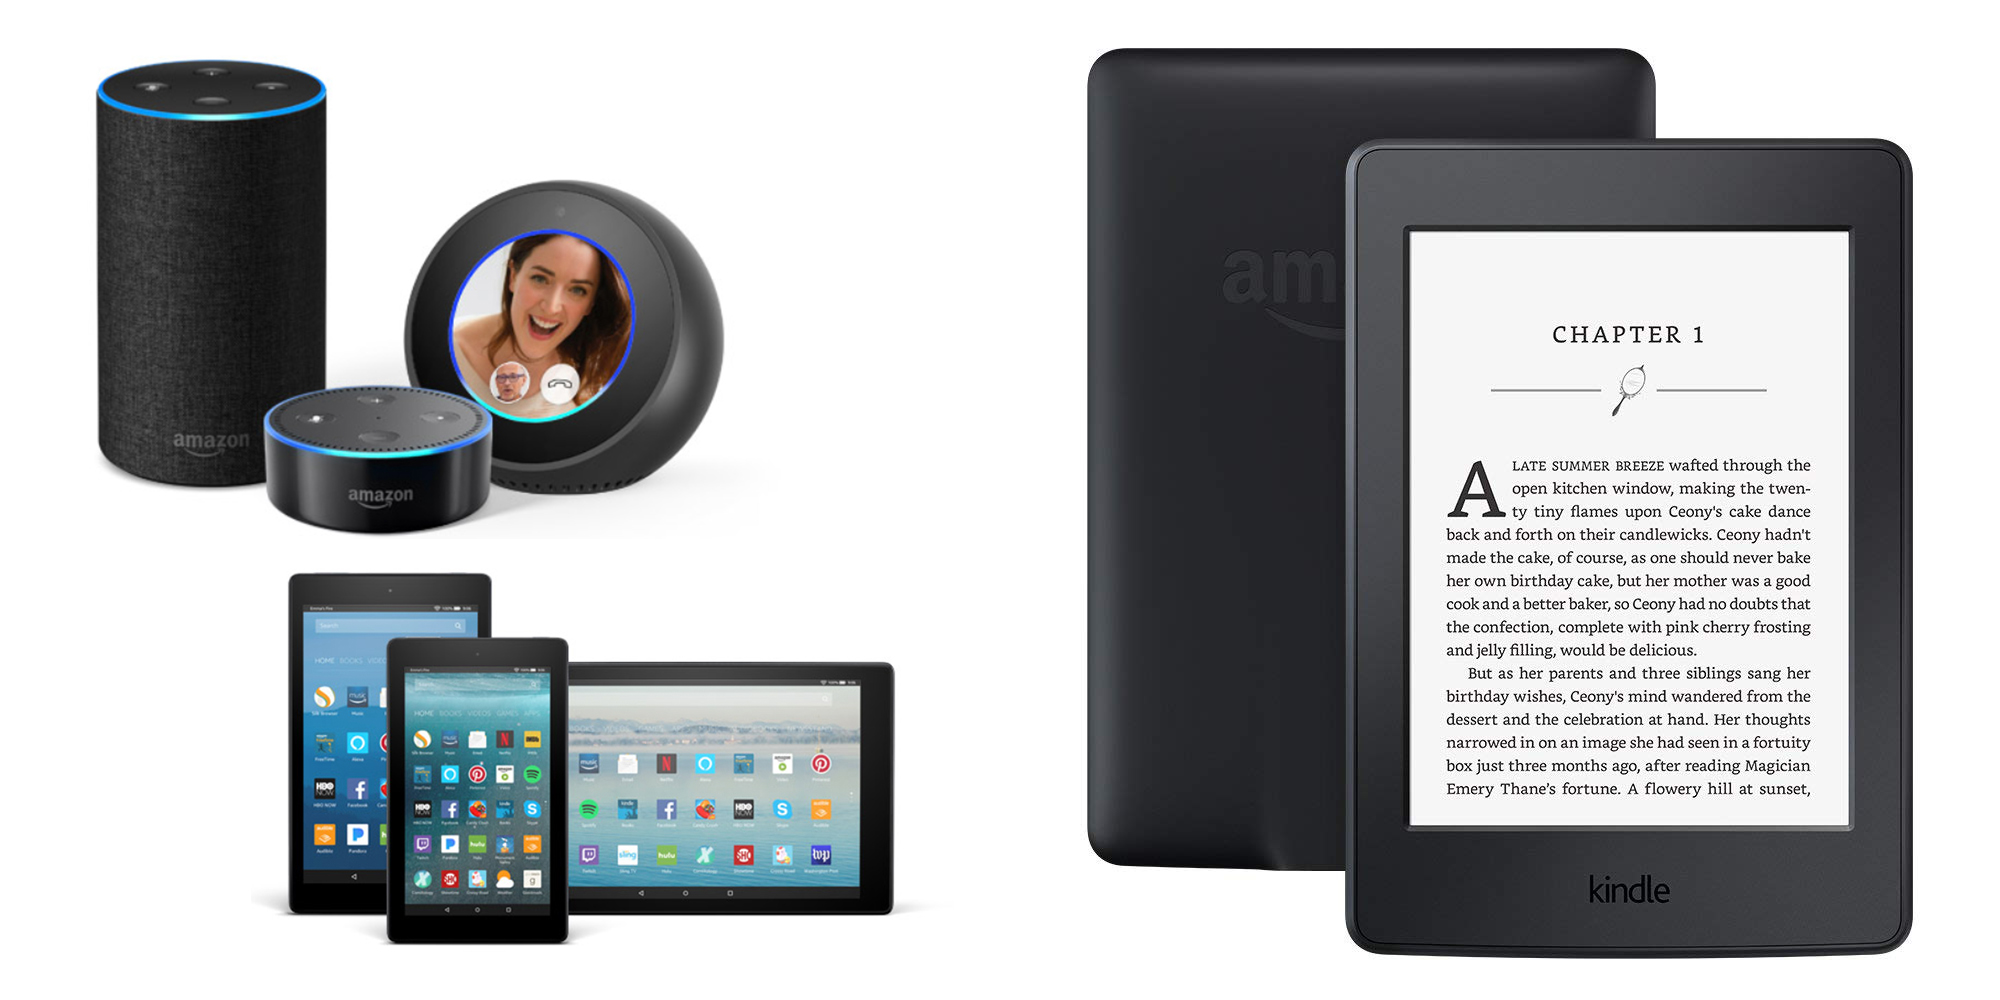 Amazon Cyber Monday deals on Echo, Fire tablets, Kindle, more including new Show Mode dock ...